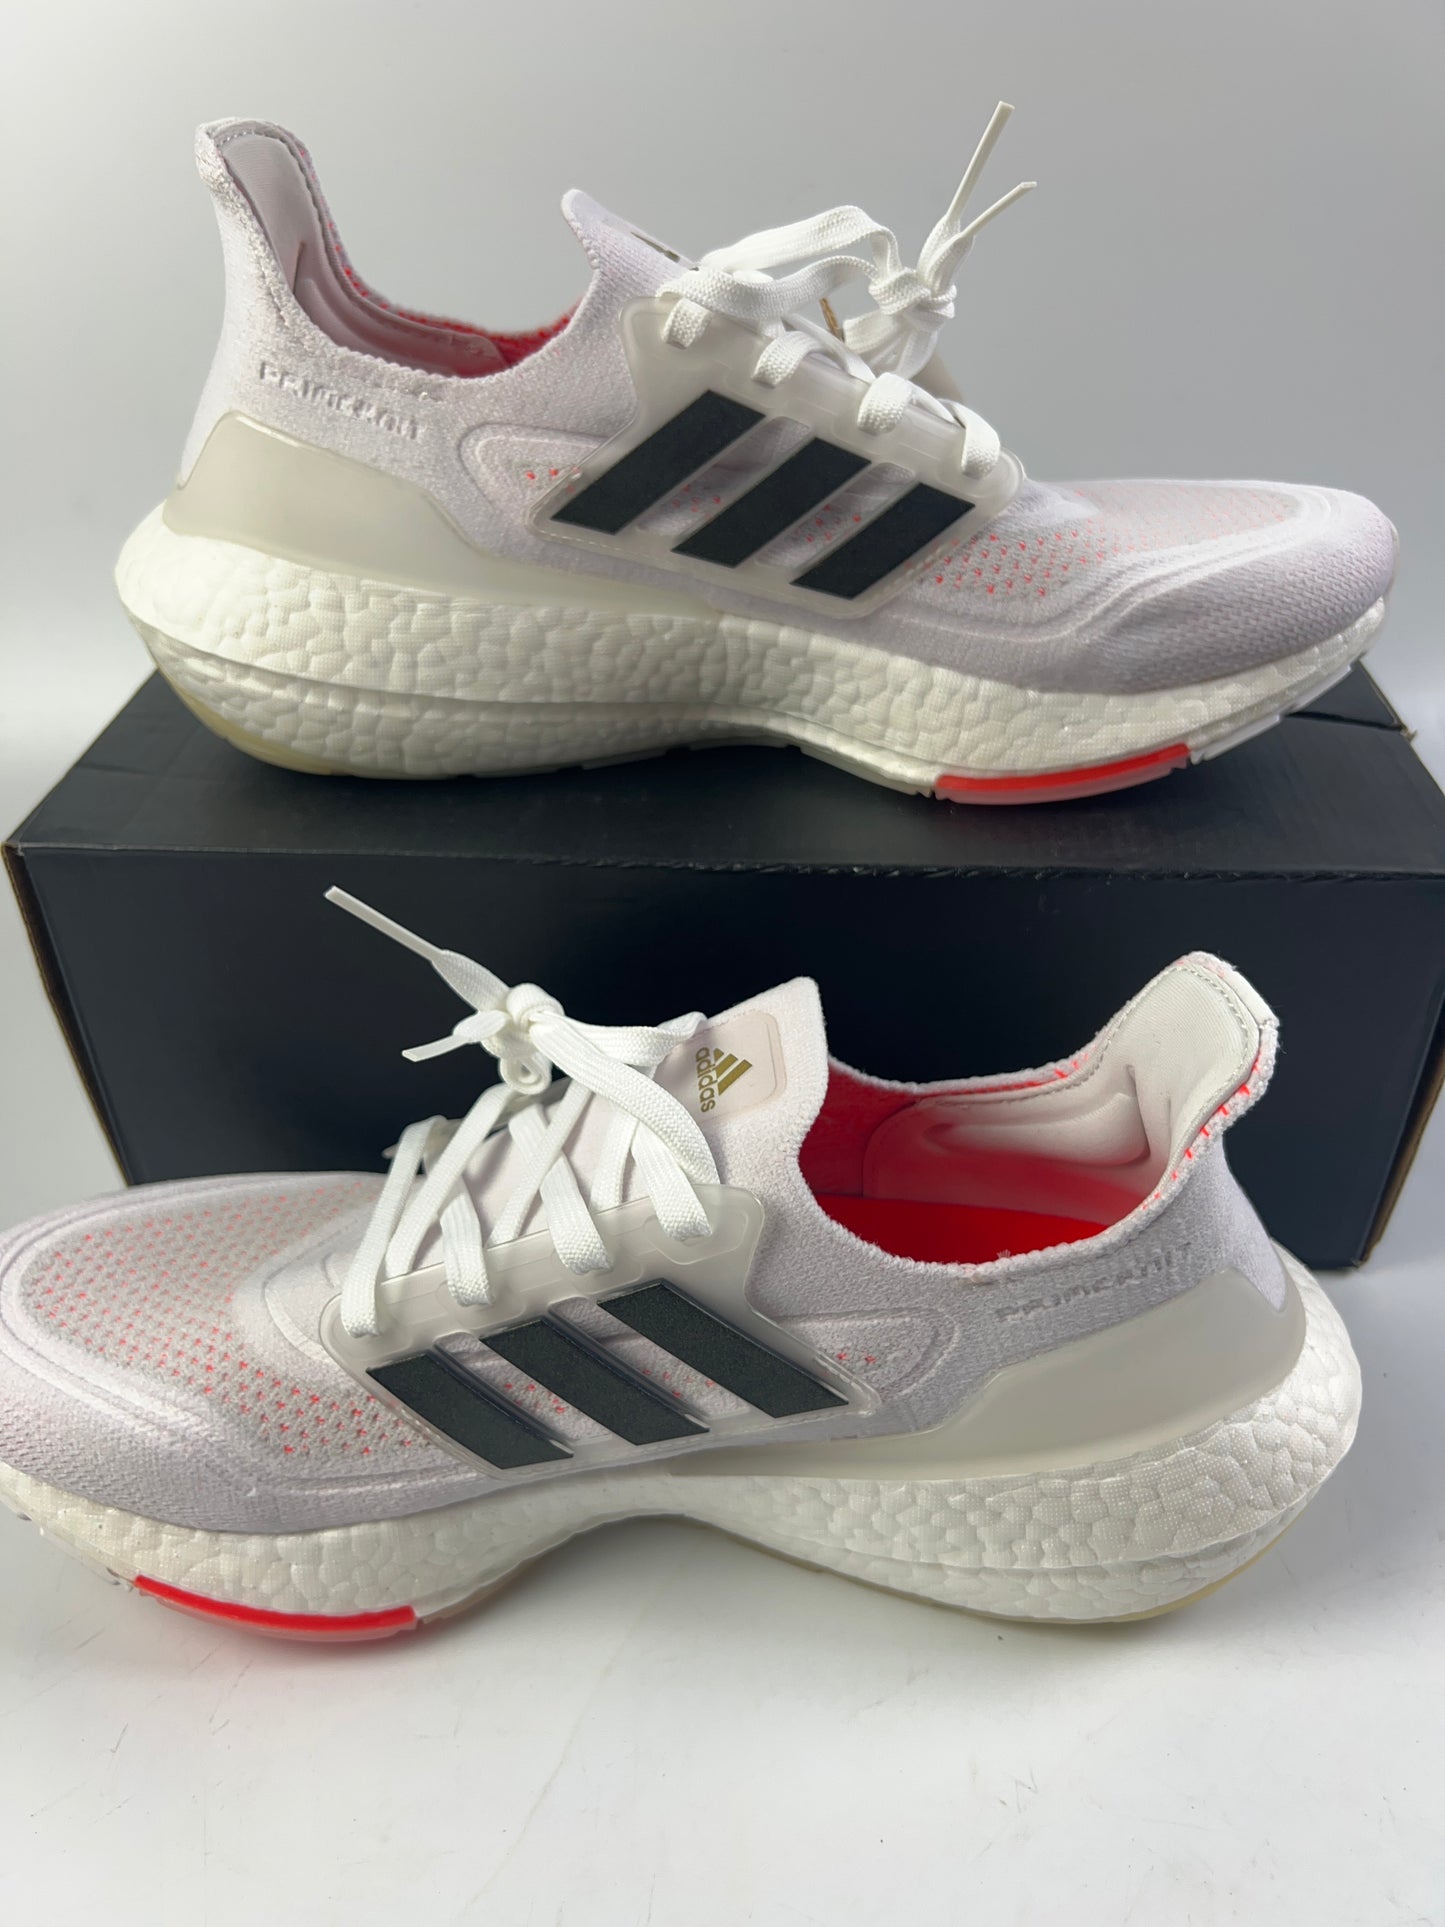 Adidas Women's ULTRABOOST 21 W Running shoes S23840 US Sz 10 New with box